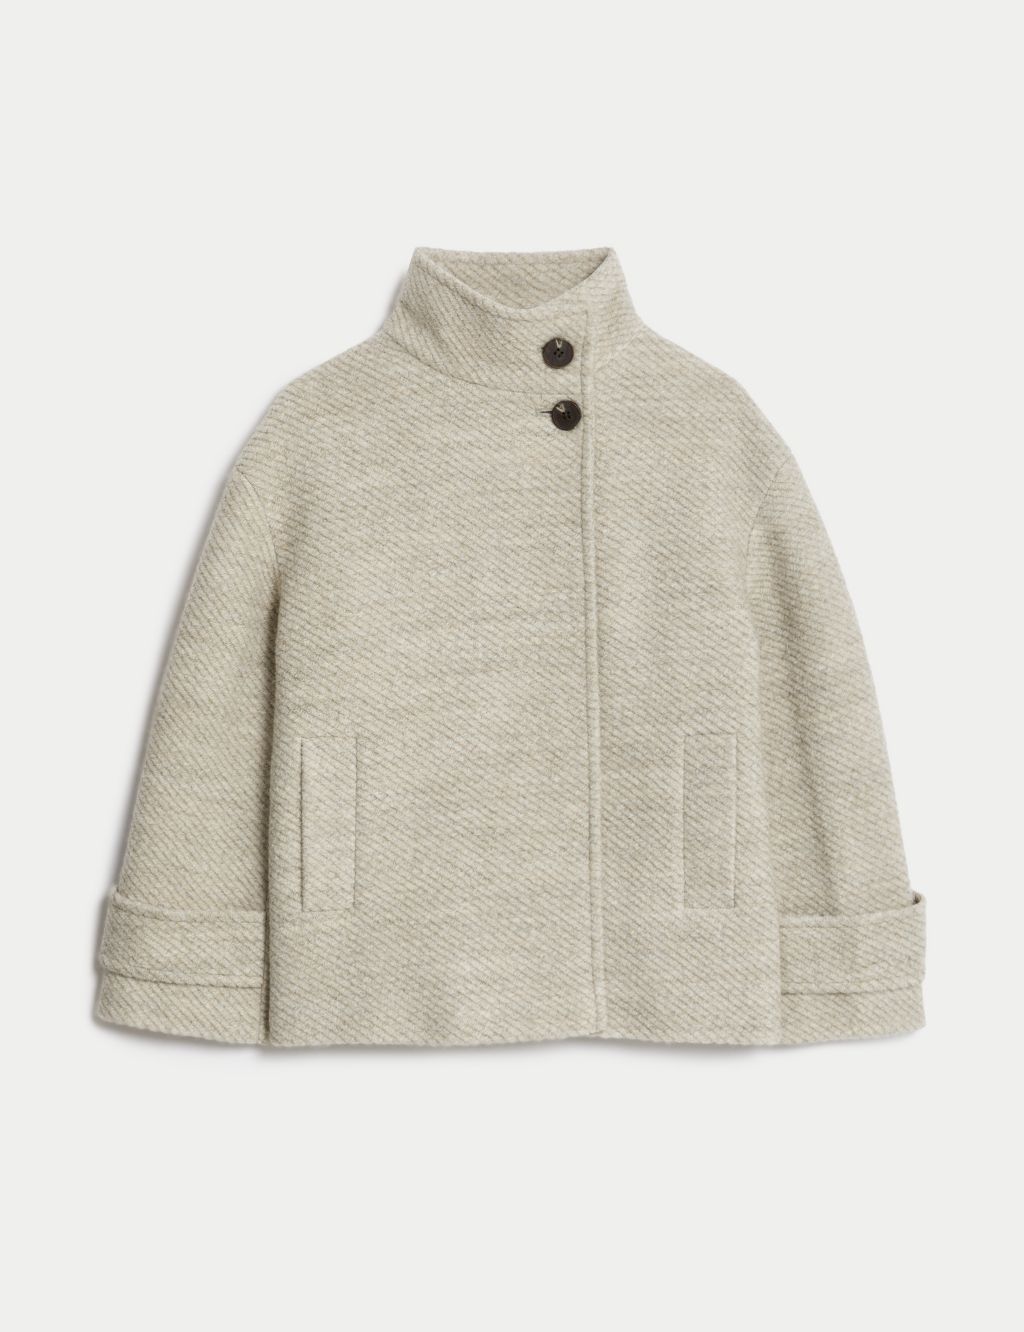 Twill Funnel Neck Short Coat with Wool image 2